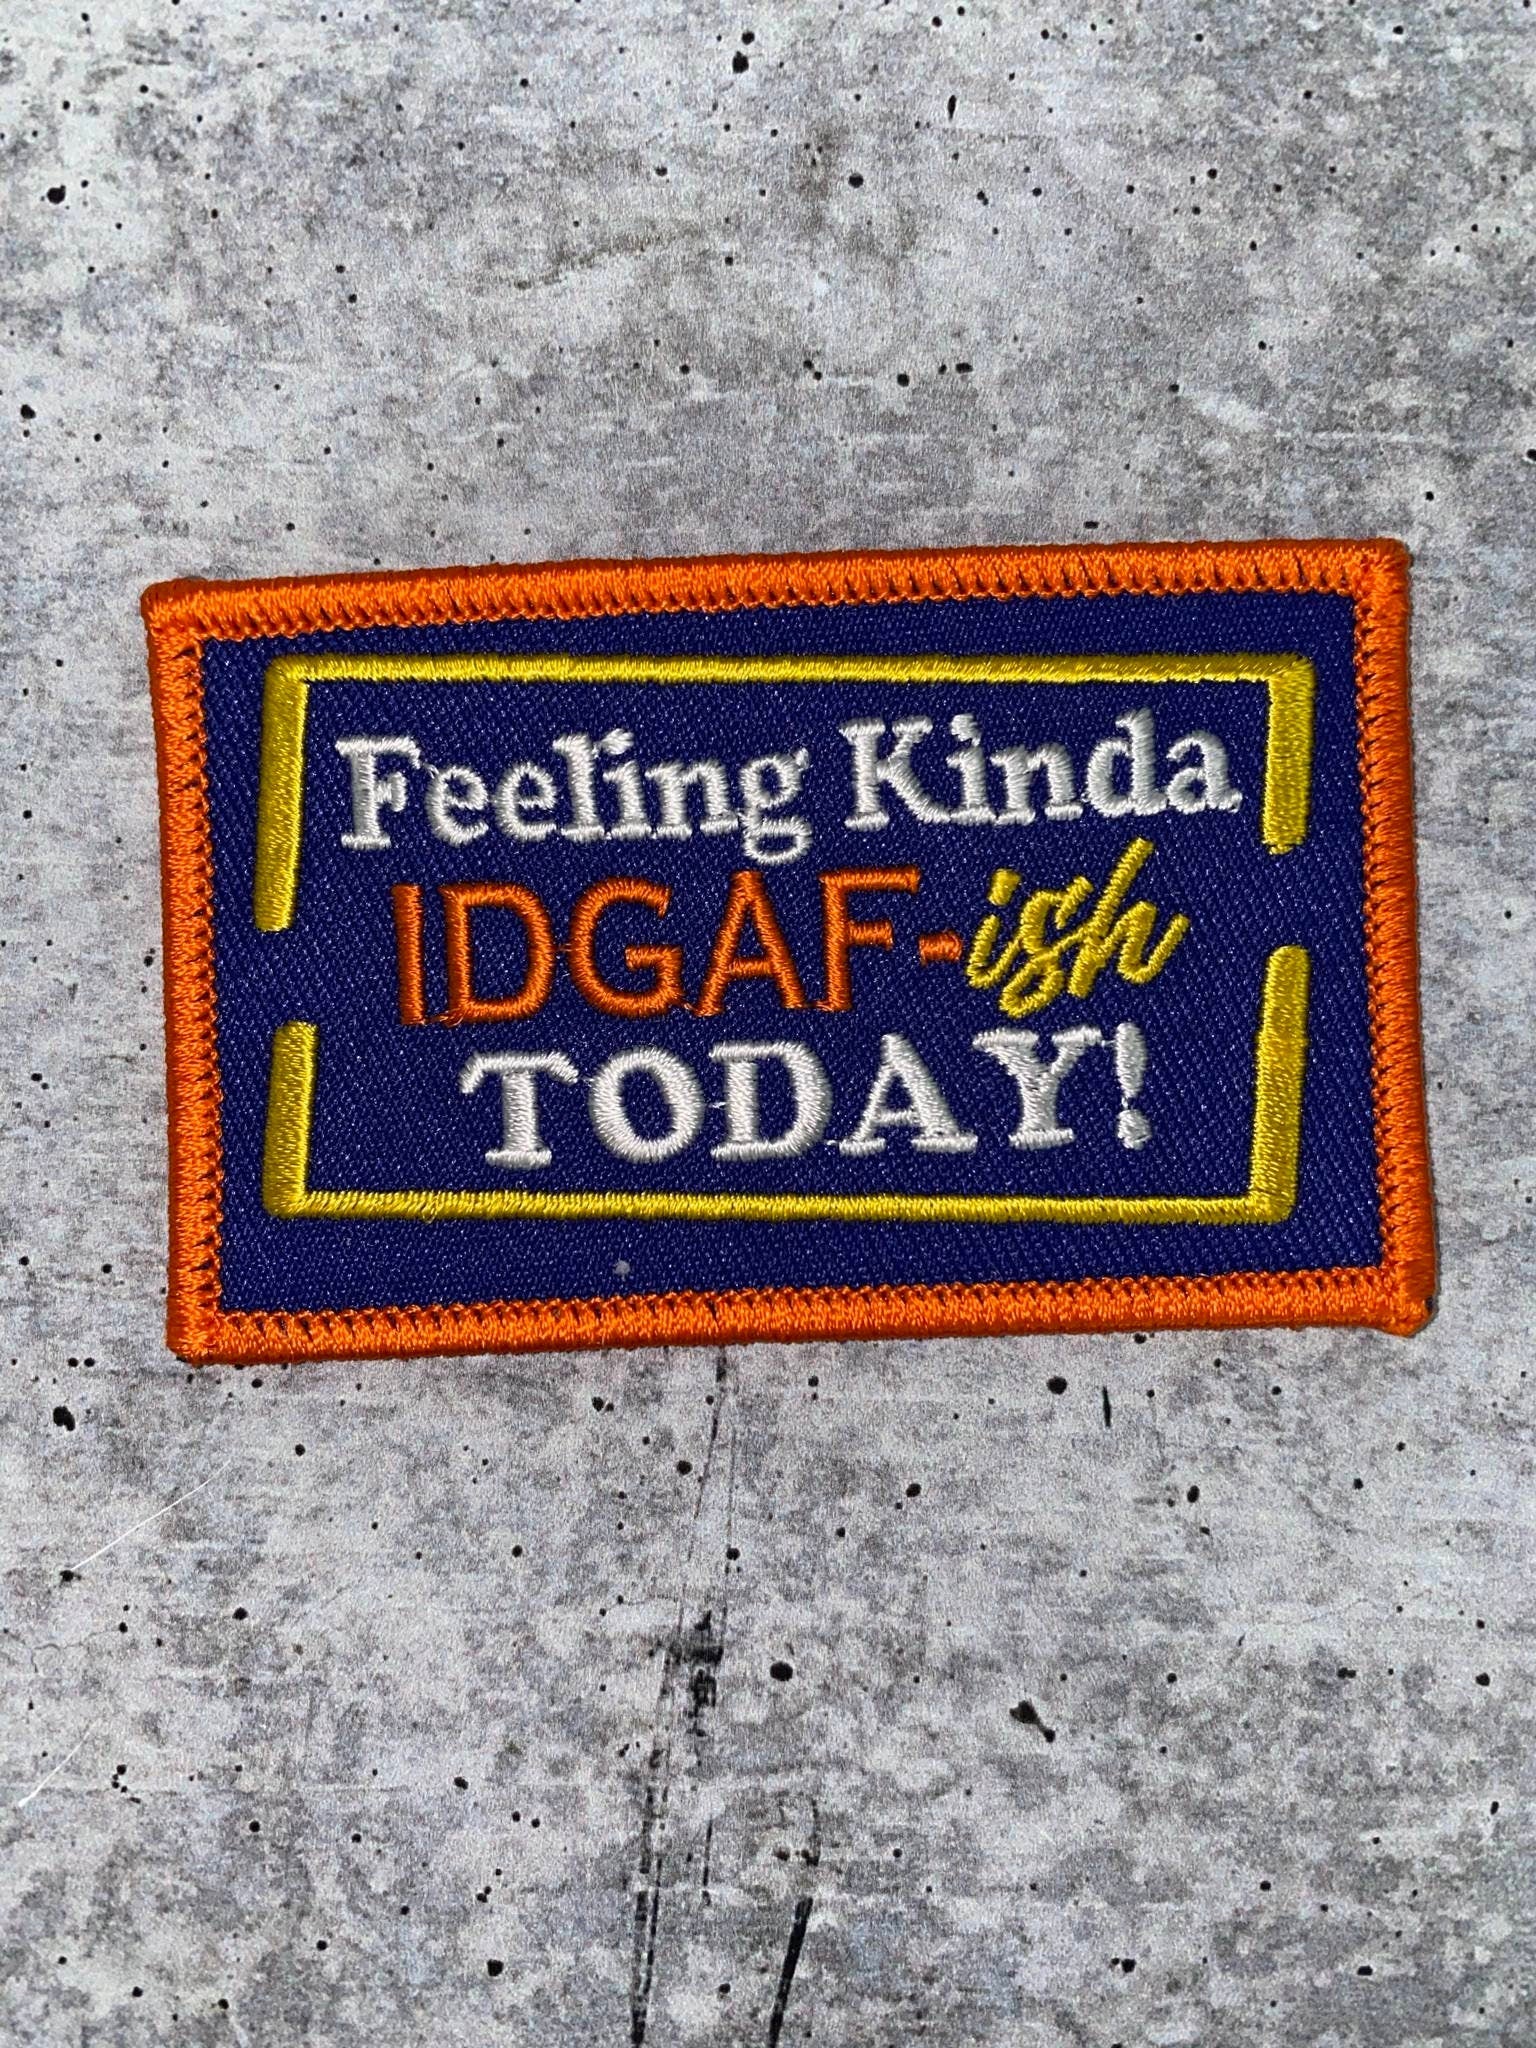 Exclusive Patch, "Feeling Kinda IDGAF-ish Today" Funny Statement Badge, Iron-on Embroidered Patch; Size 3" x 2", Small Jacket Patch, DIY